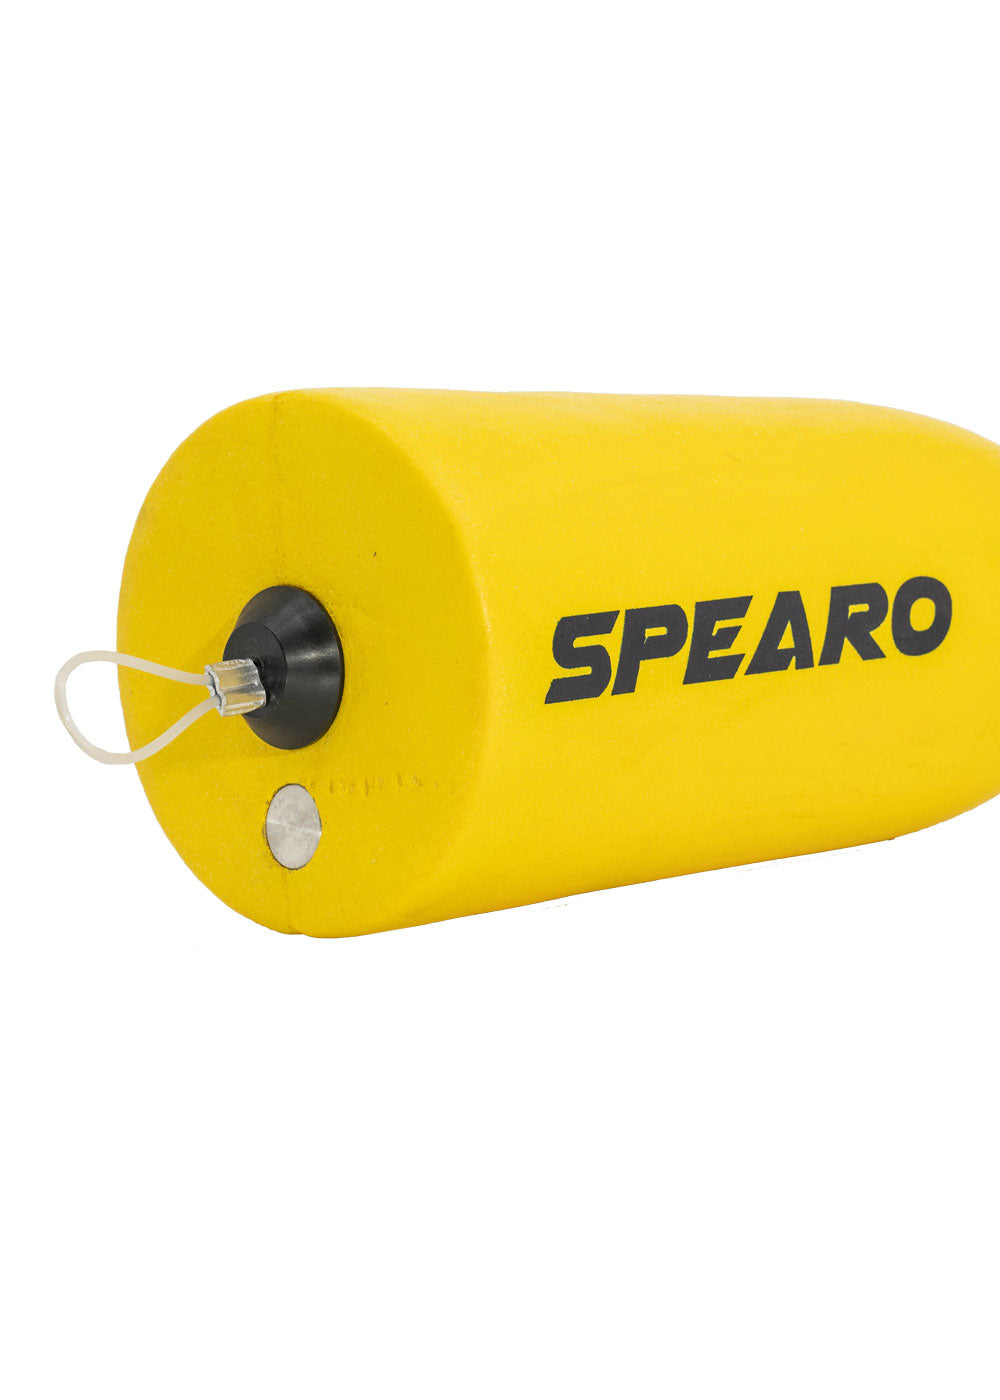 Spearo Seapup 5L Hard Float With Flag